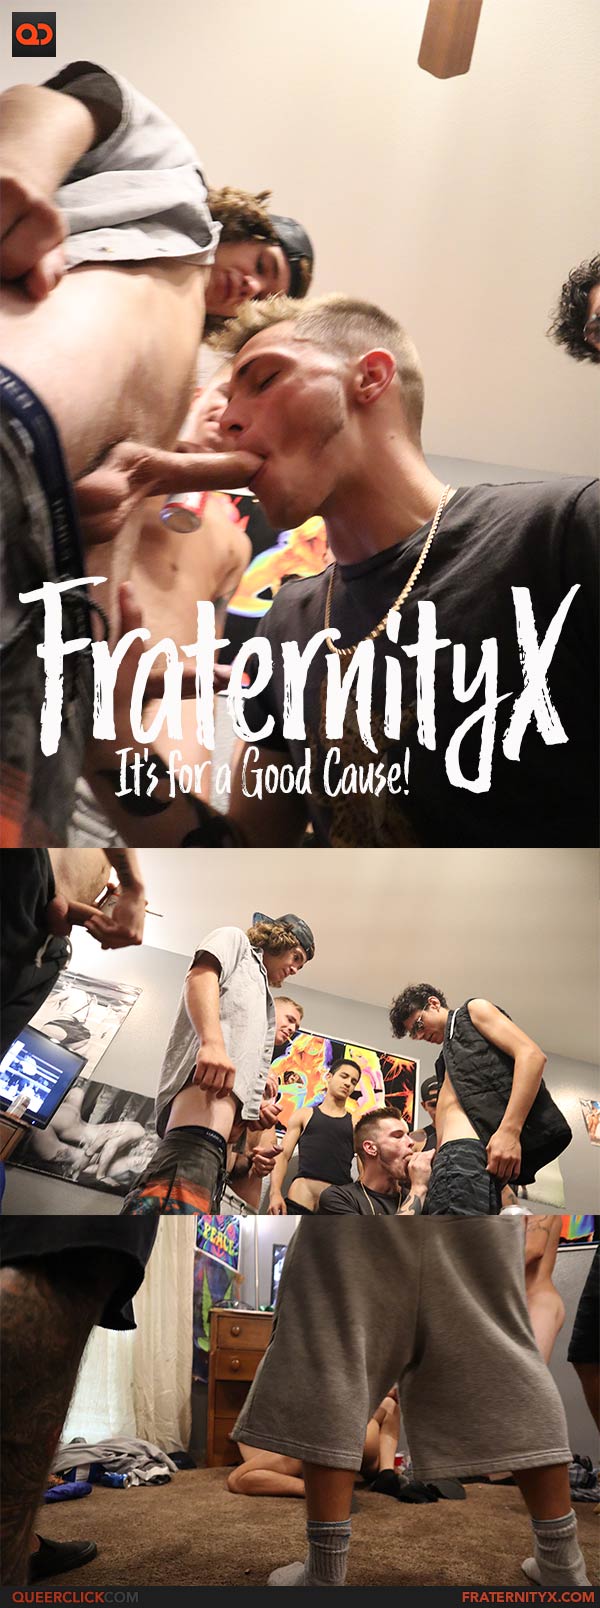 FraternityX: It's for a Good Cause!